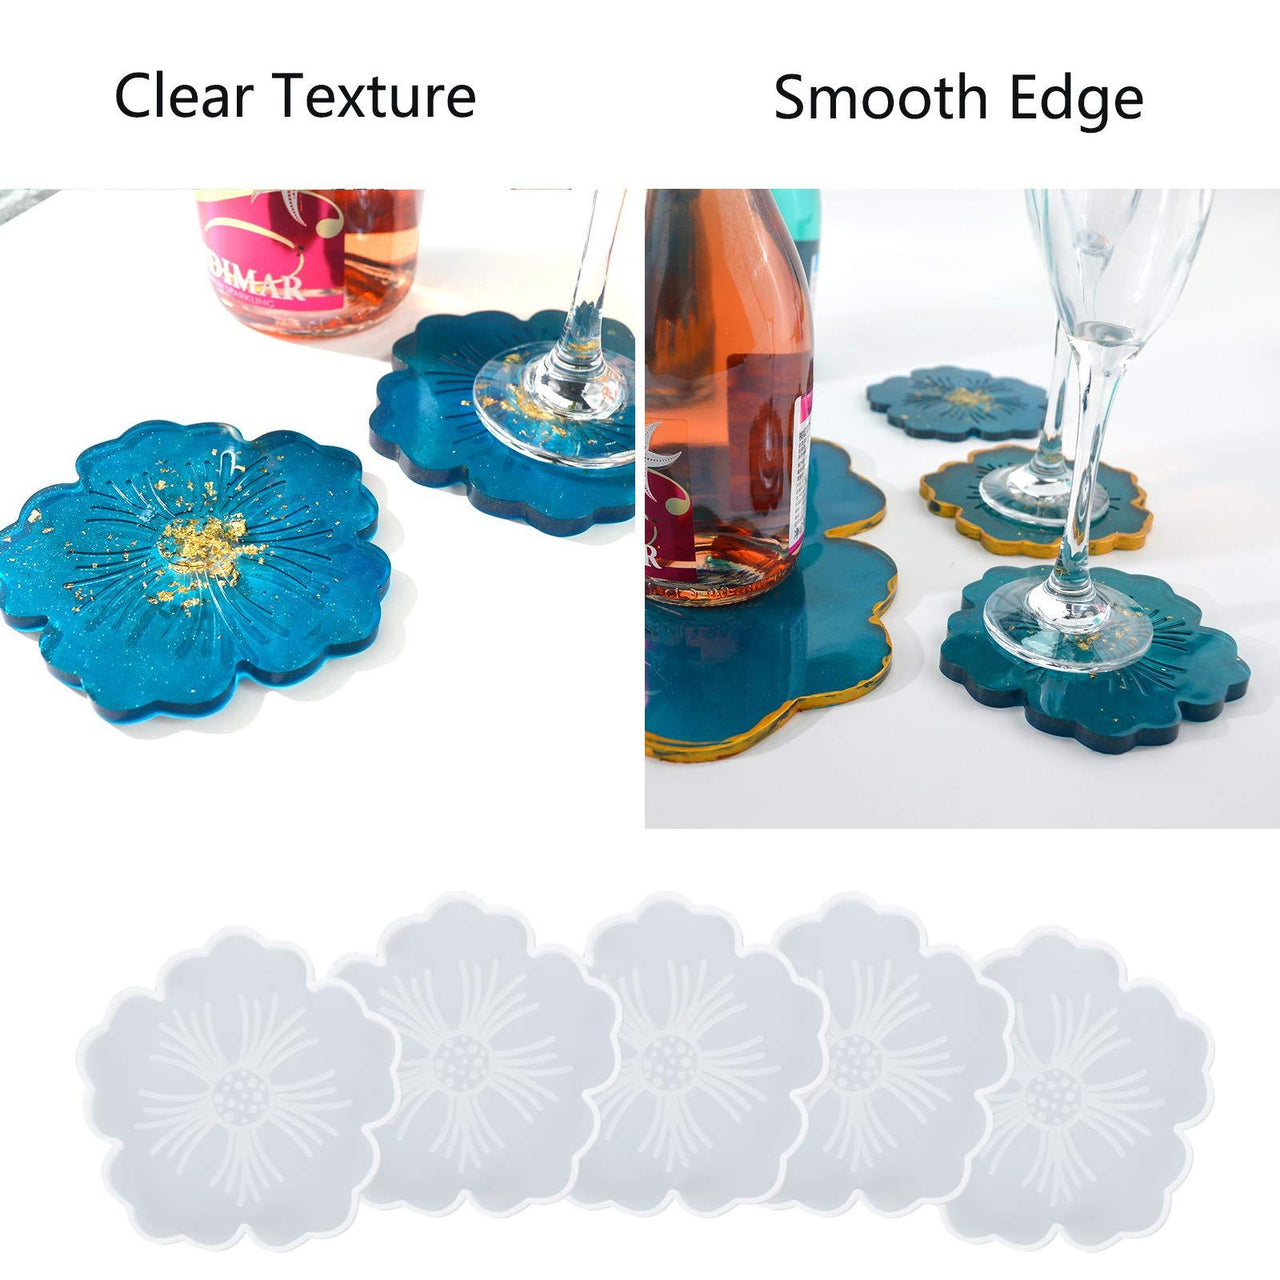 Flower Mold Set of 6 / Home Decoration Silicone Molds / Tray Mold / Coaster Mold Mold for Resin /